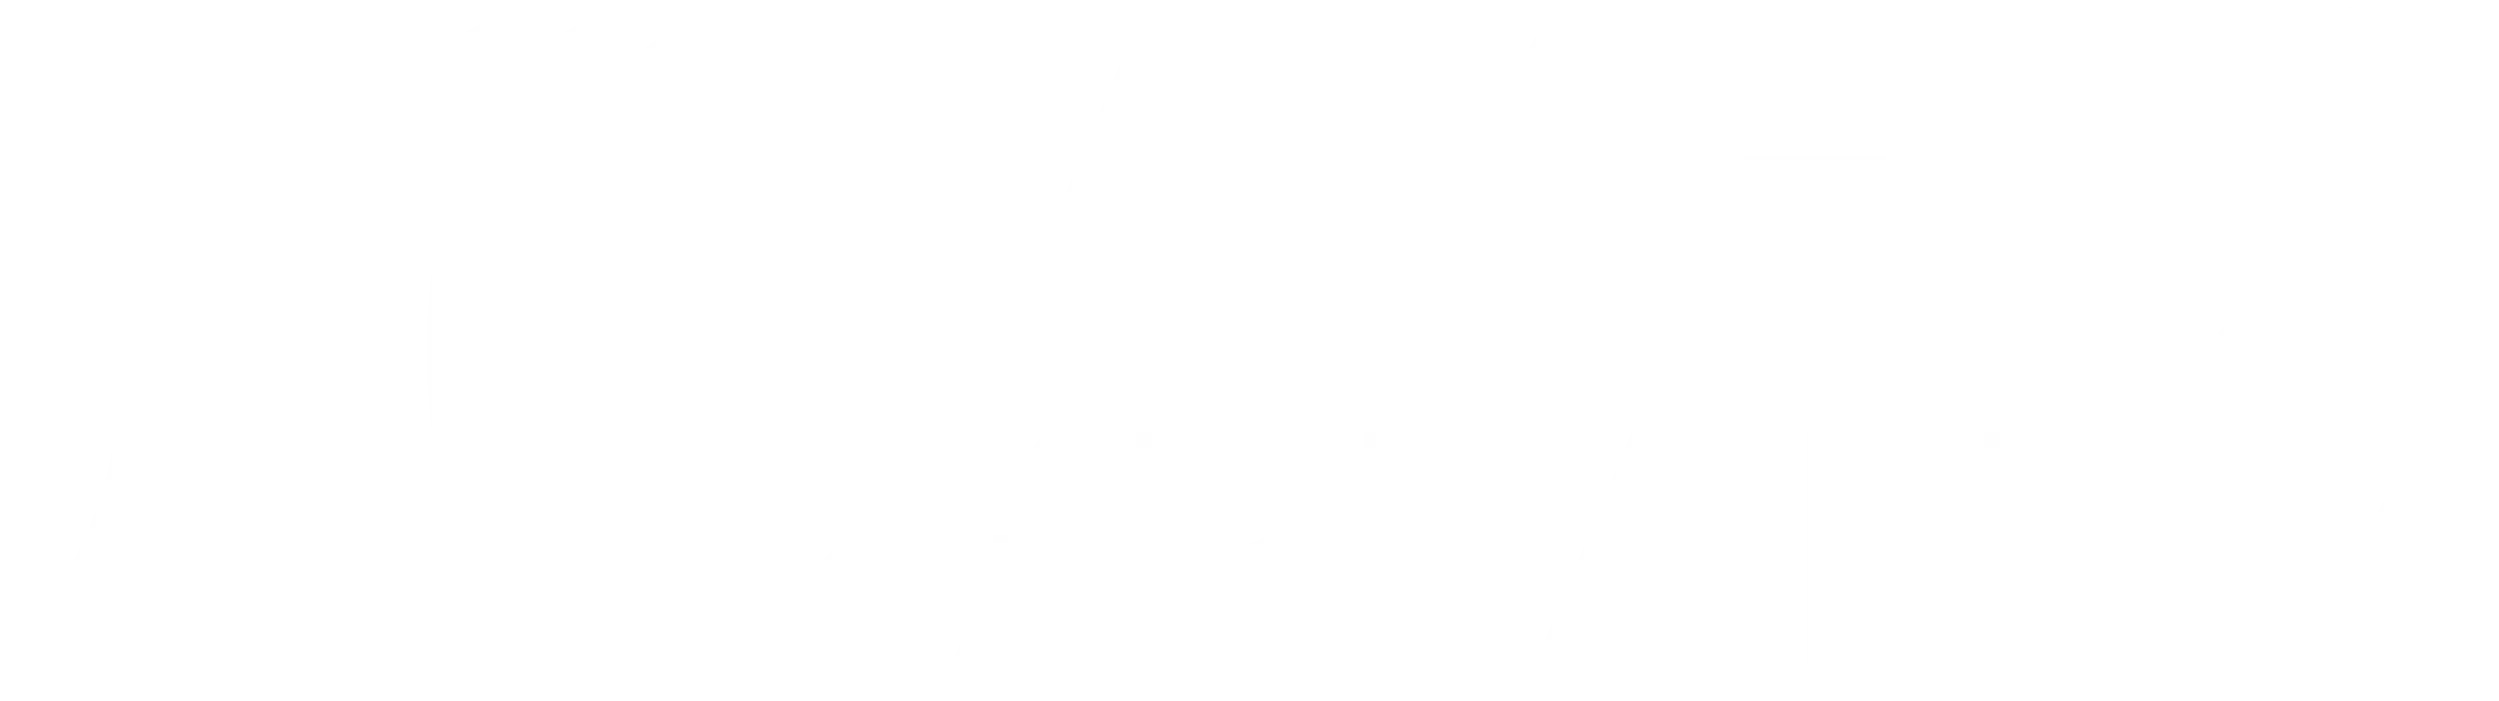 Layers of reality